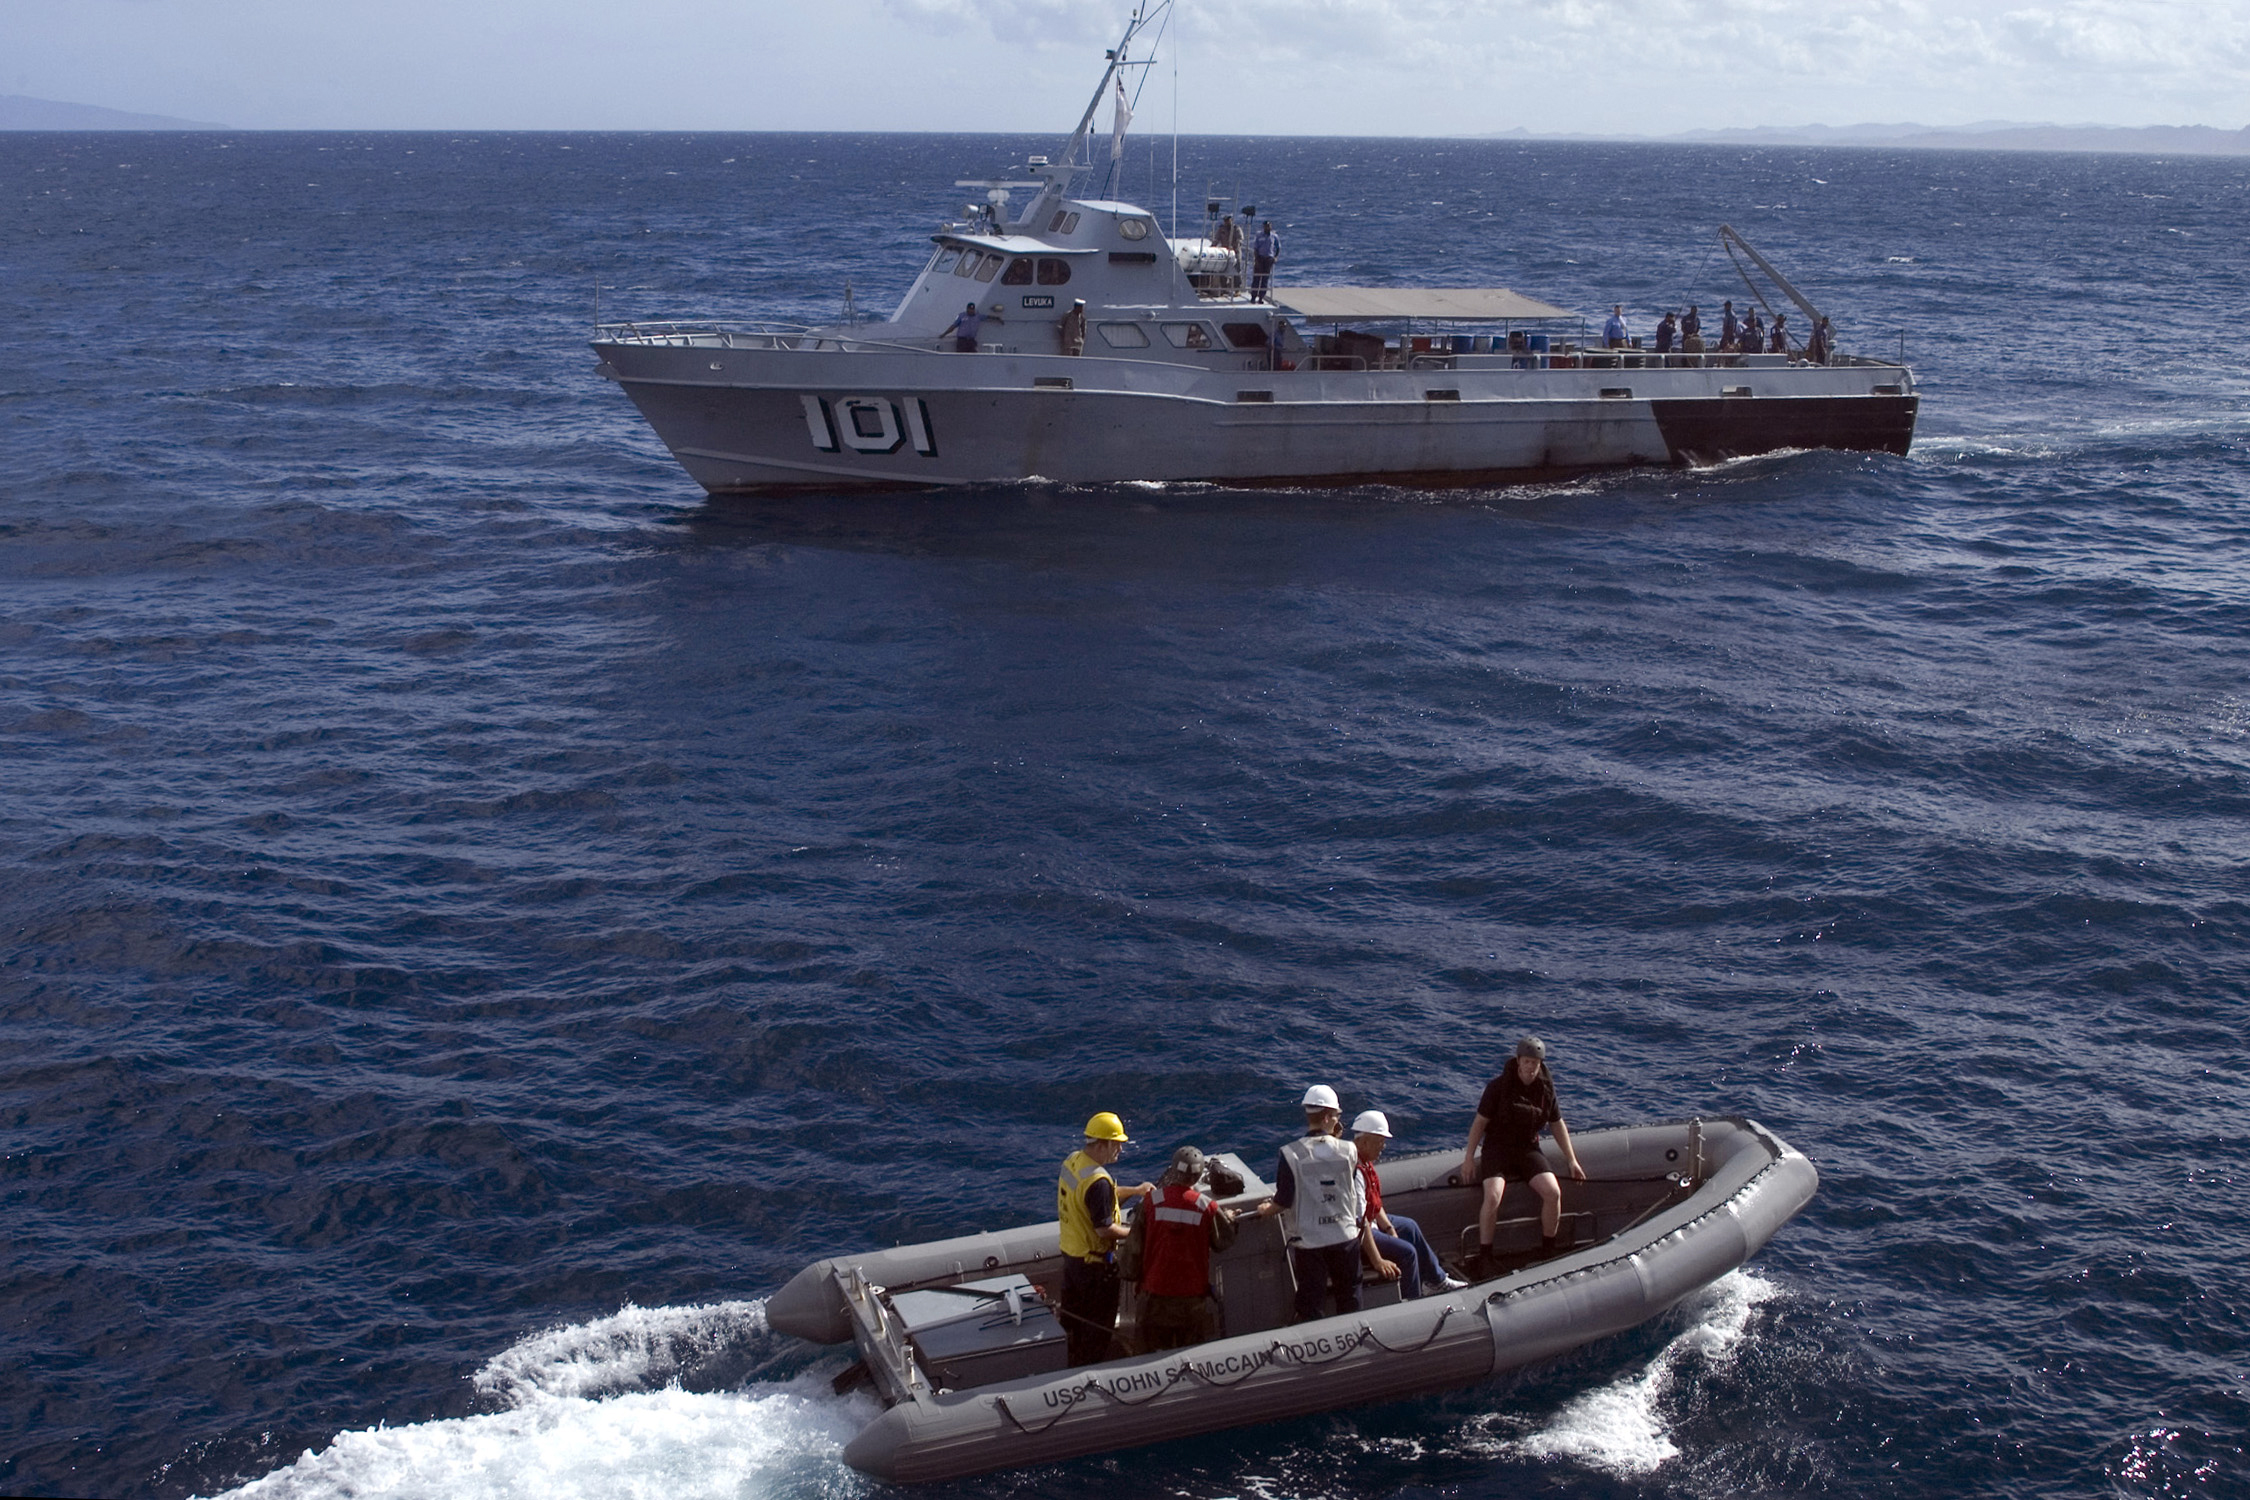 US Navy 080729-N-9123L-004 A rigid hull inflatable boat from the guided-missile destroyer USS John S. McCain (DDG 56) approaches the Fijian coastal patrol boat Levouka during an emergency medical evacuation.jpg